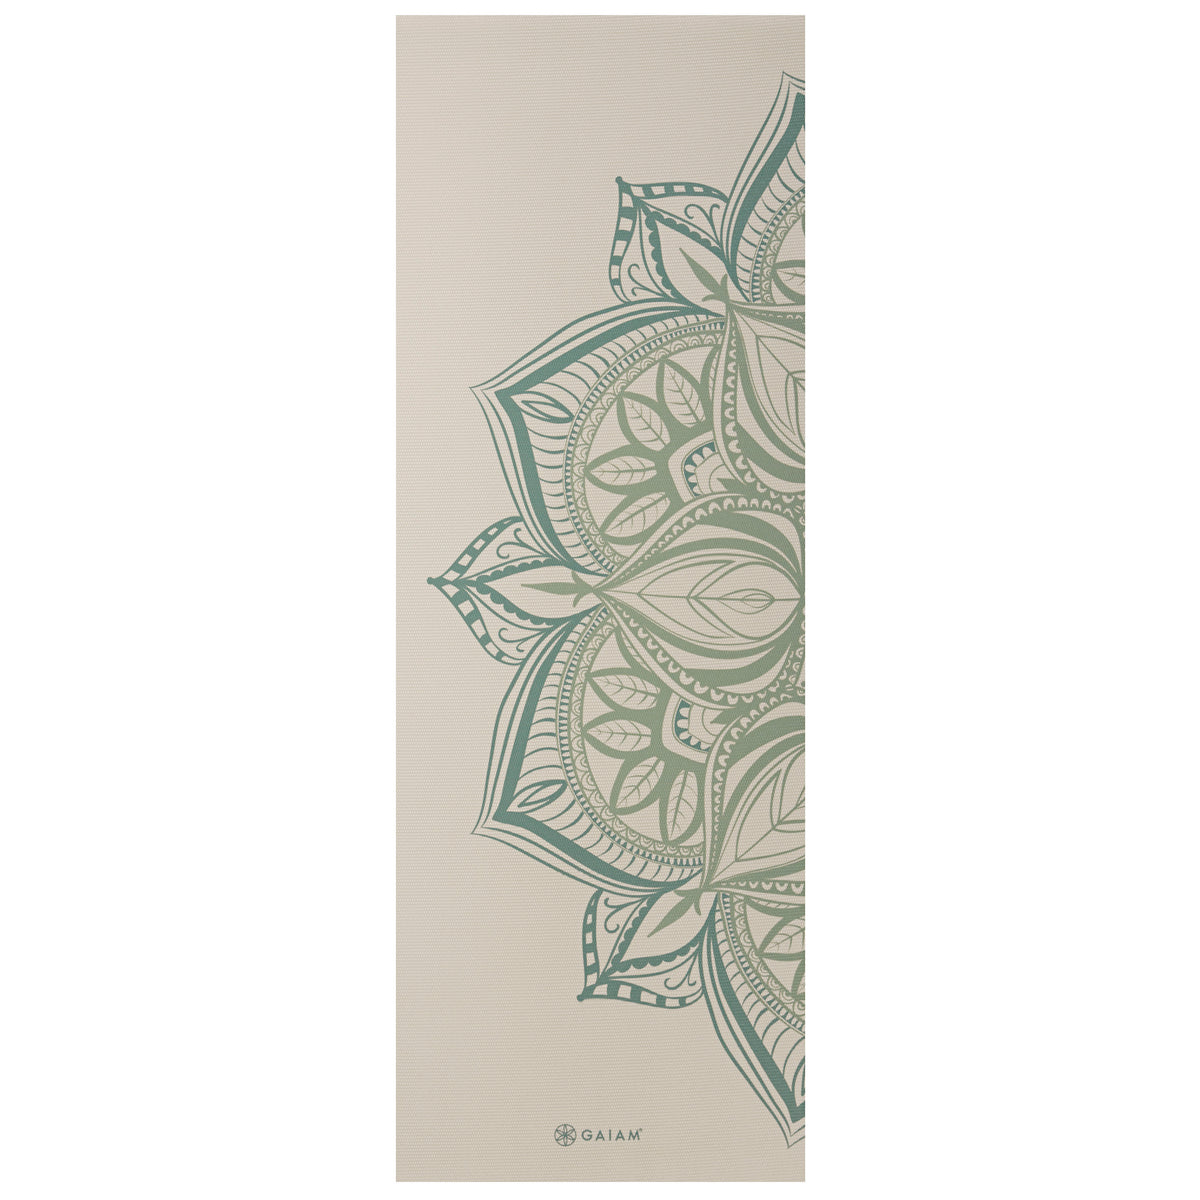 Gaiam Printed Point Yoga Mat (5mm) Vintage Green Point flat